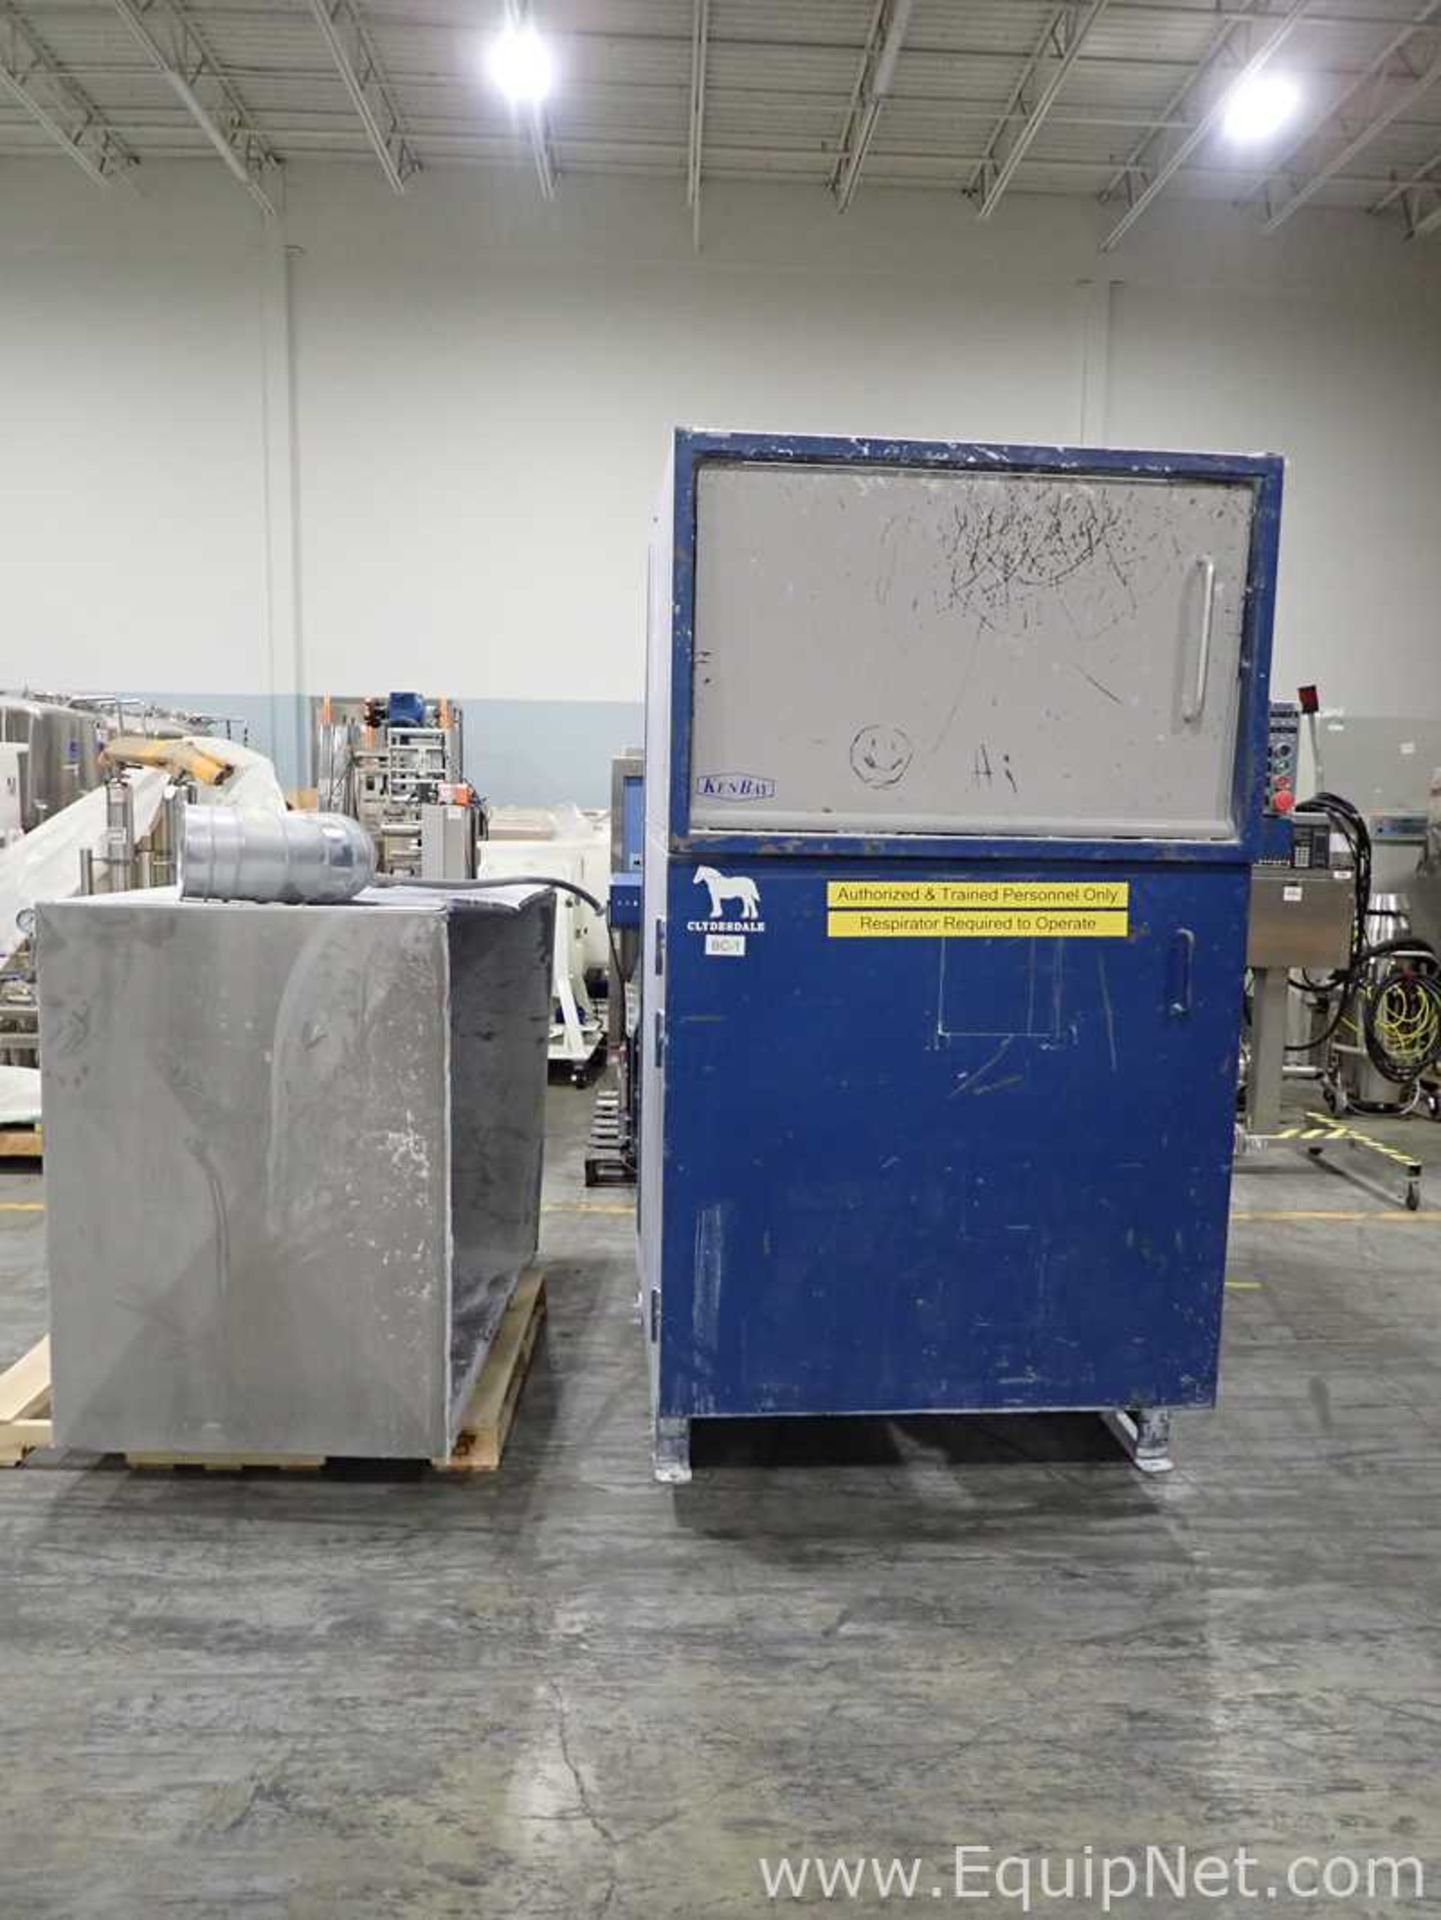 KenBay Clydesdale RotoPac Rotary Arm Trash Compactor